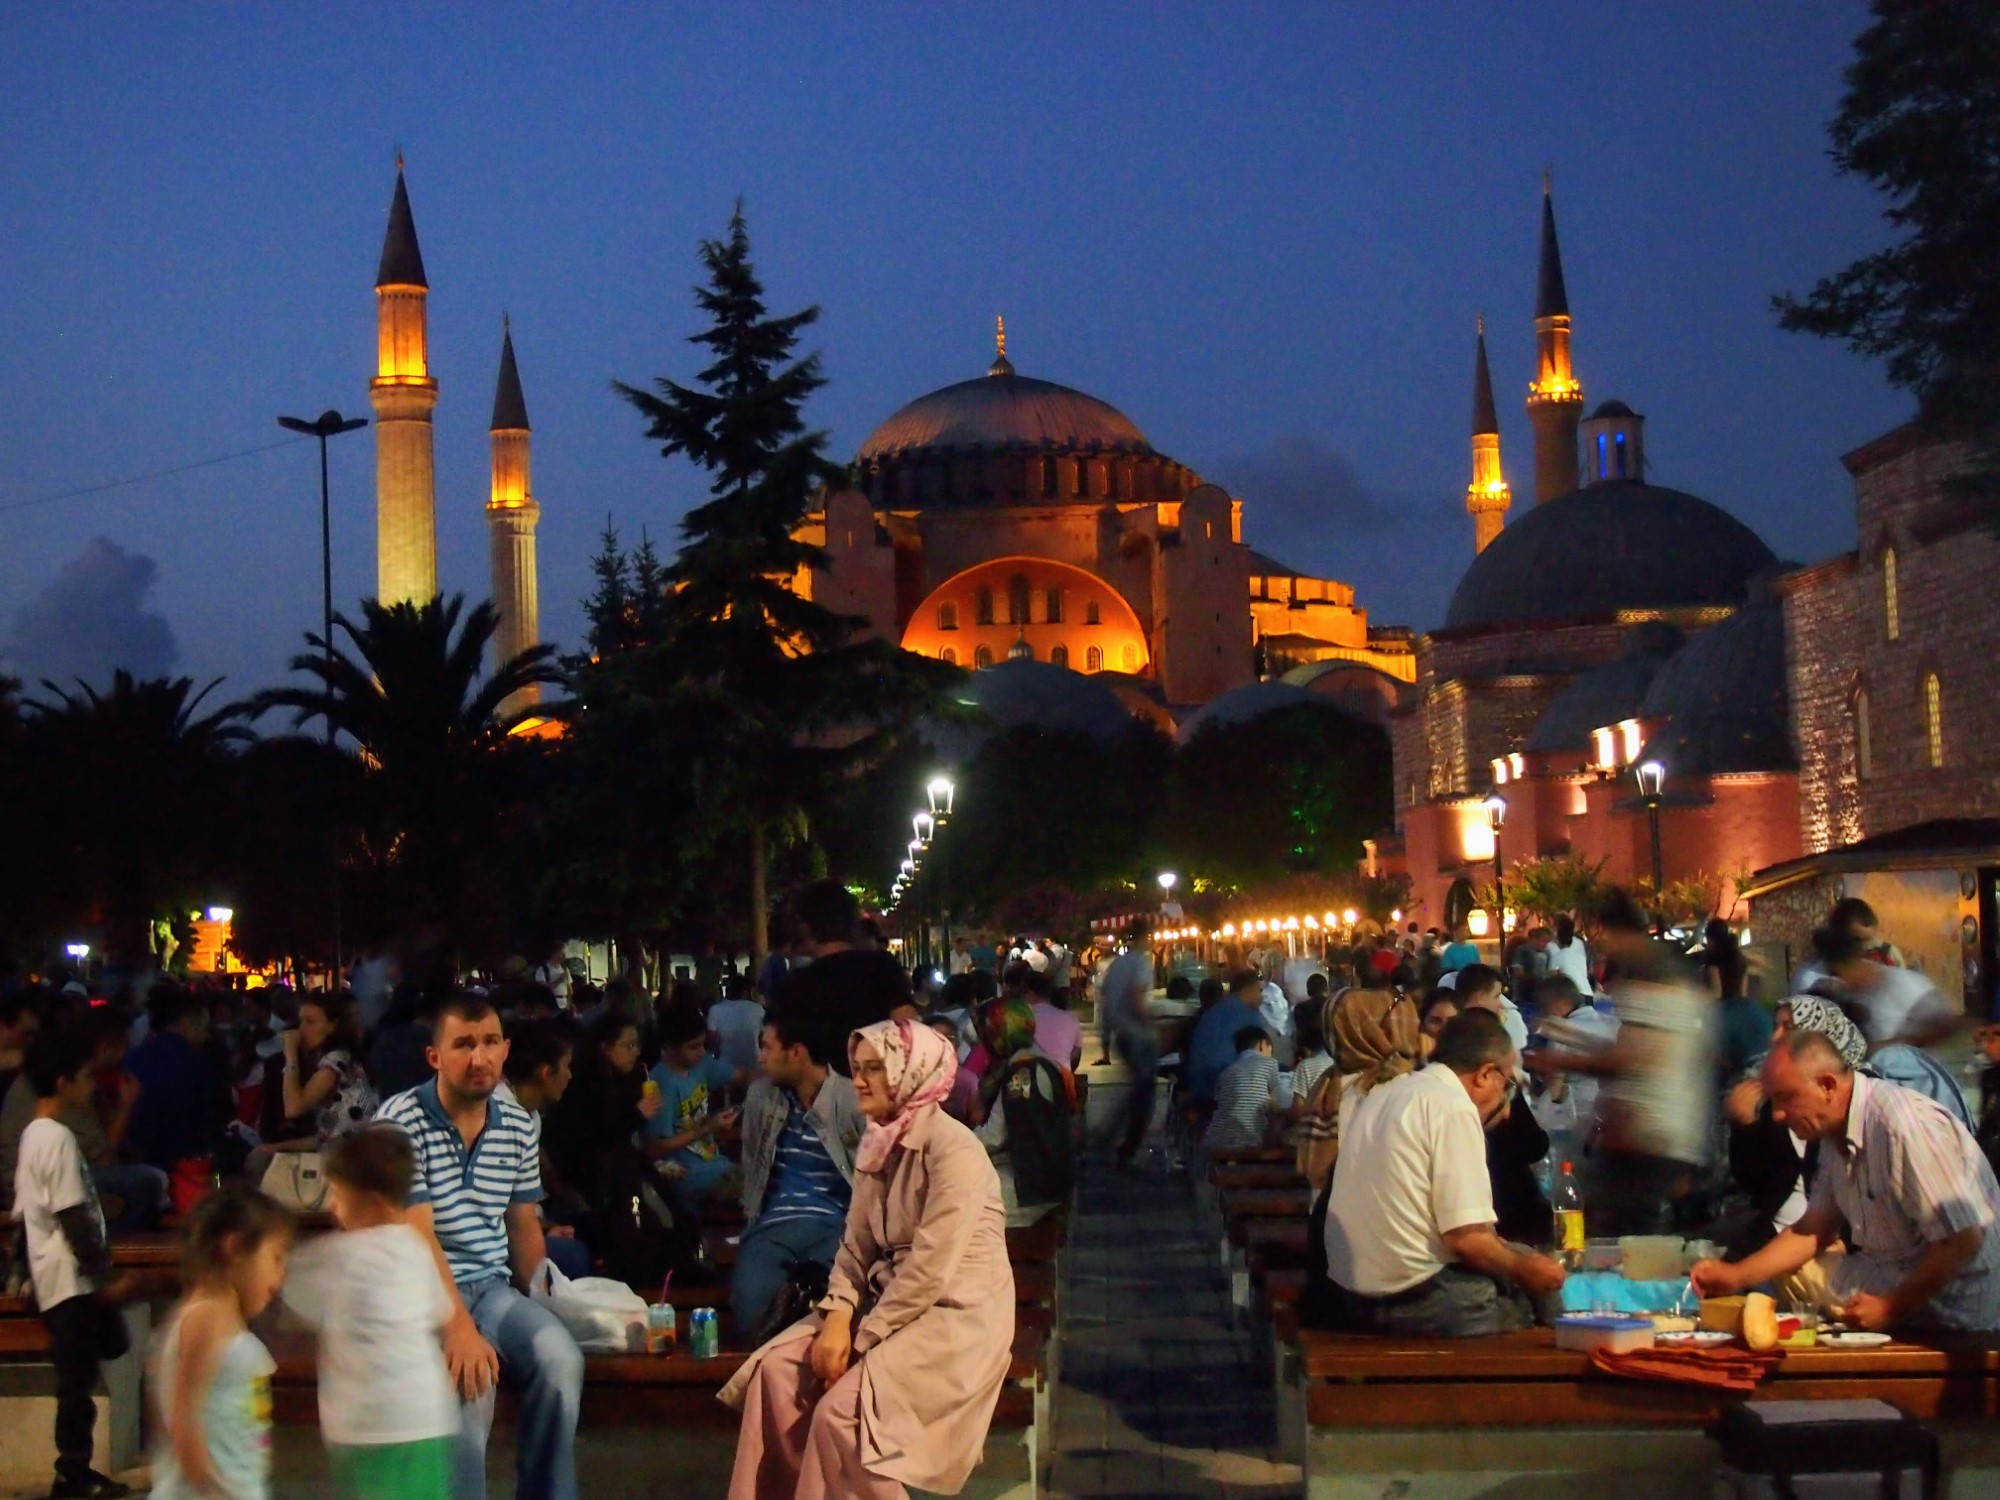 Many people sitting at dusk outside the Hagia Sophia in Istanbul